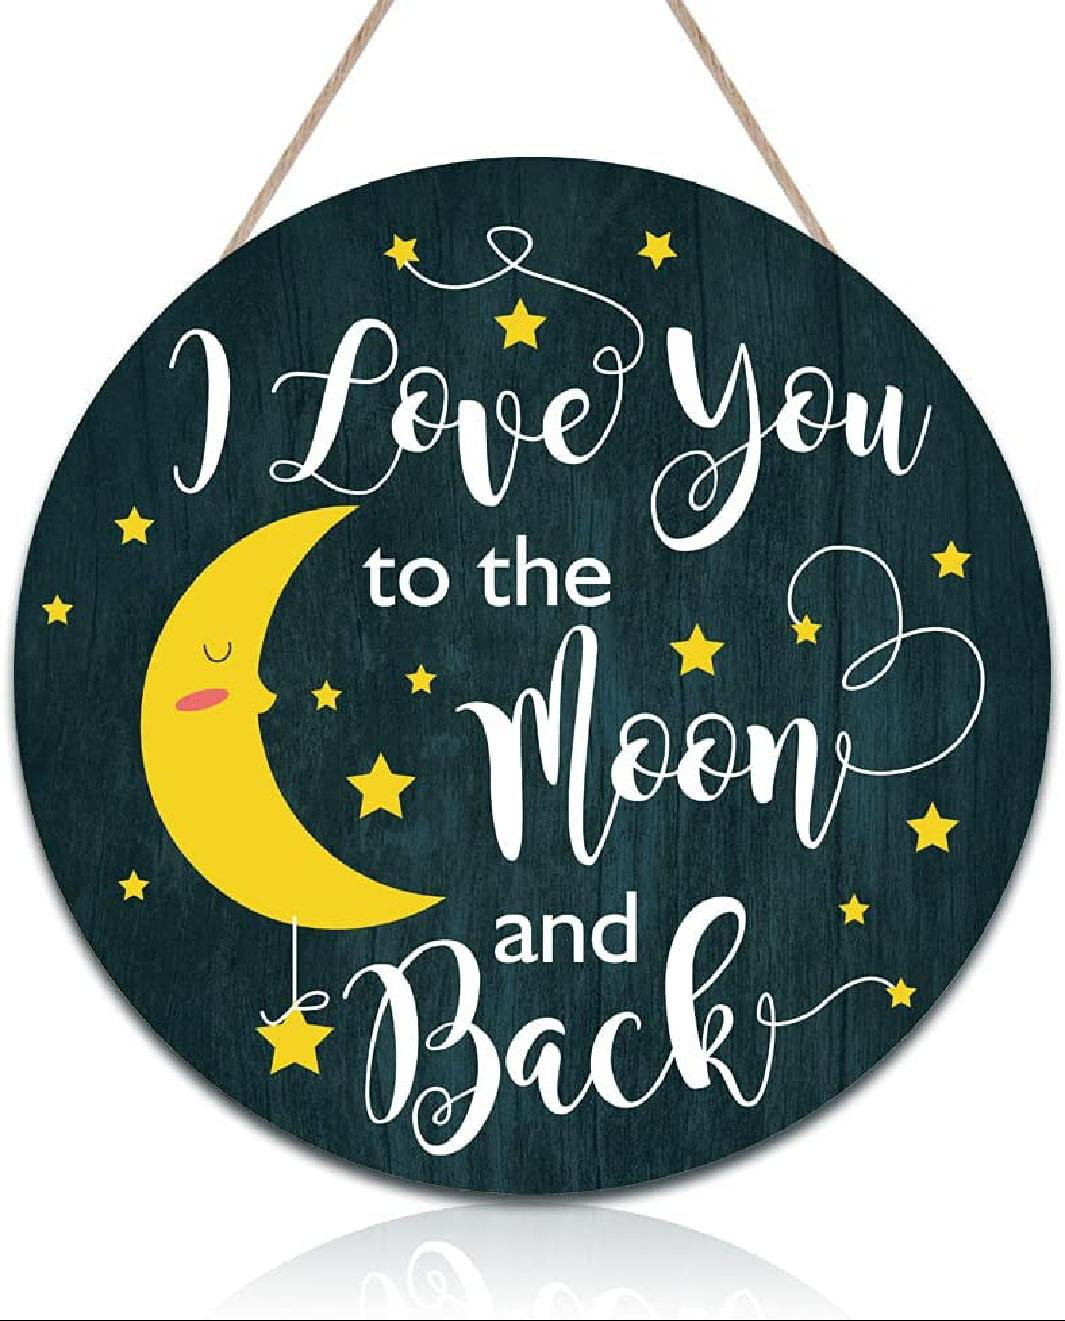 Wooden Round Hanging I Love you Fairy Much Plaque Sign Home Bedroom Decoration 